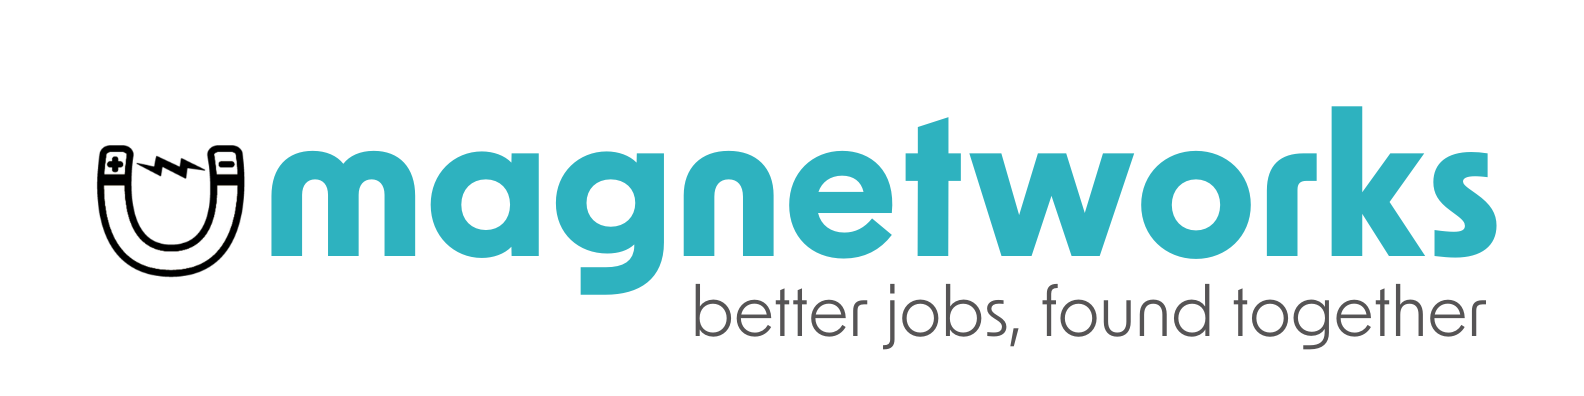 Magnetworks is a job referral platform built to rally friends and communities to help each other find their next job.